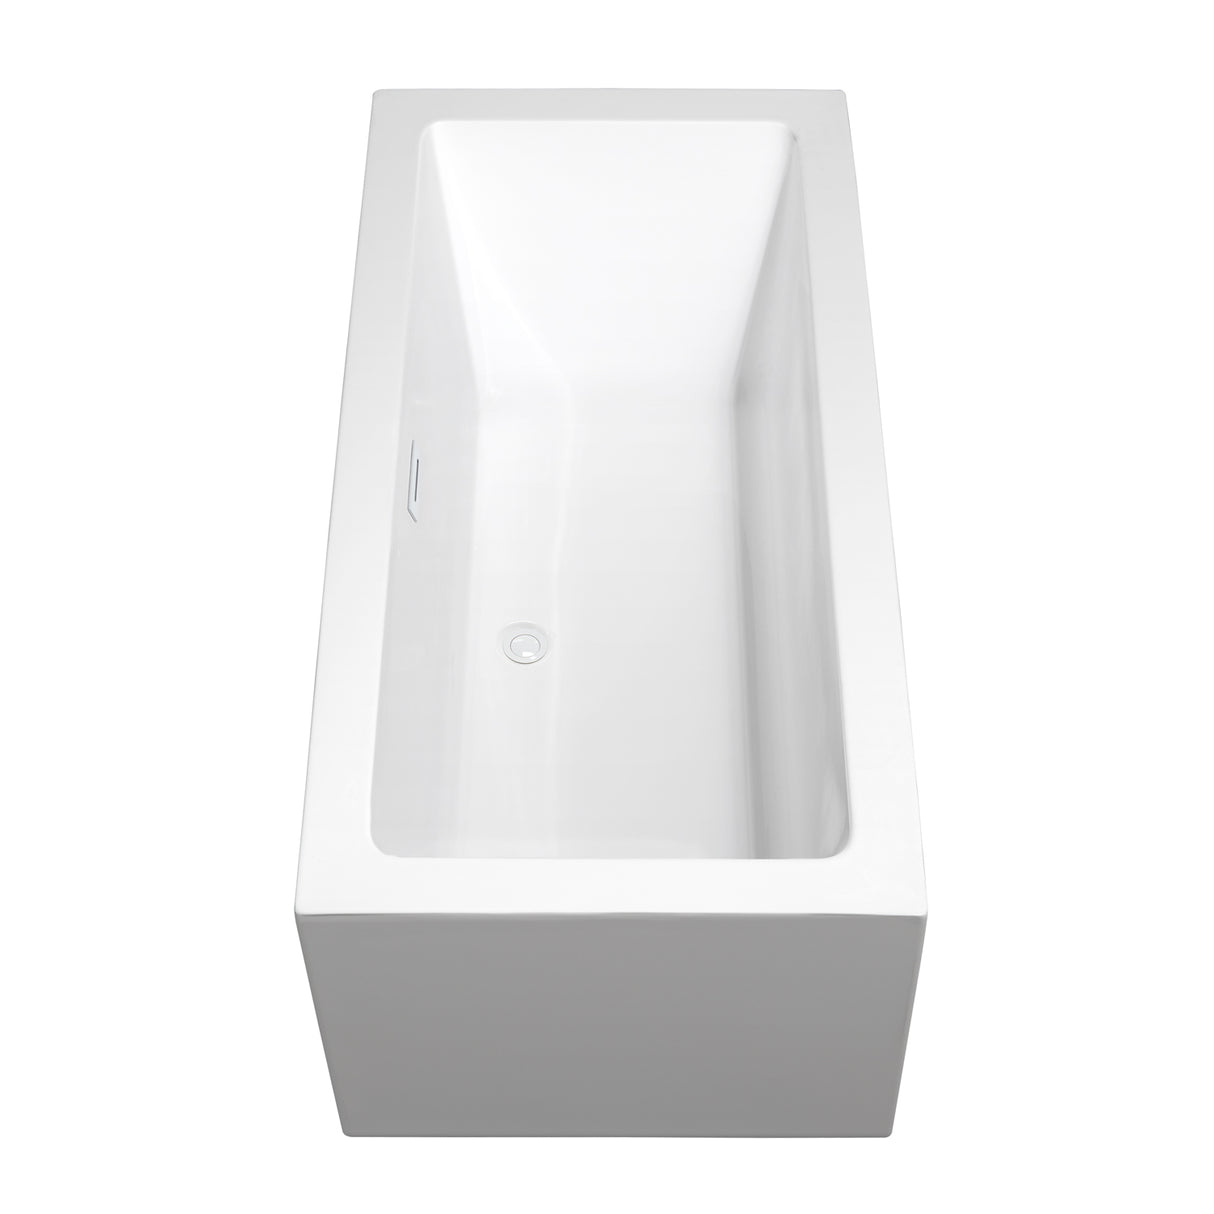 Melody 60 Inch Freestanding Bathtub in White with Shiny White Trim and Floor Mounted Faucet in Matte Black